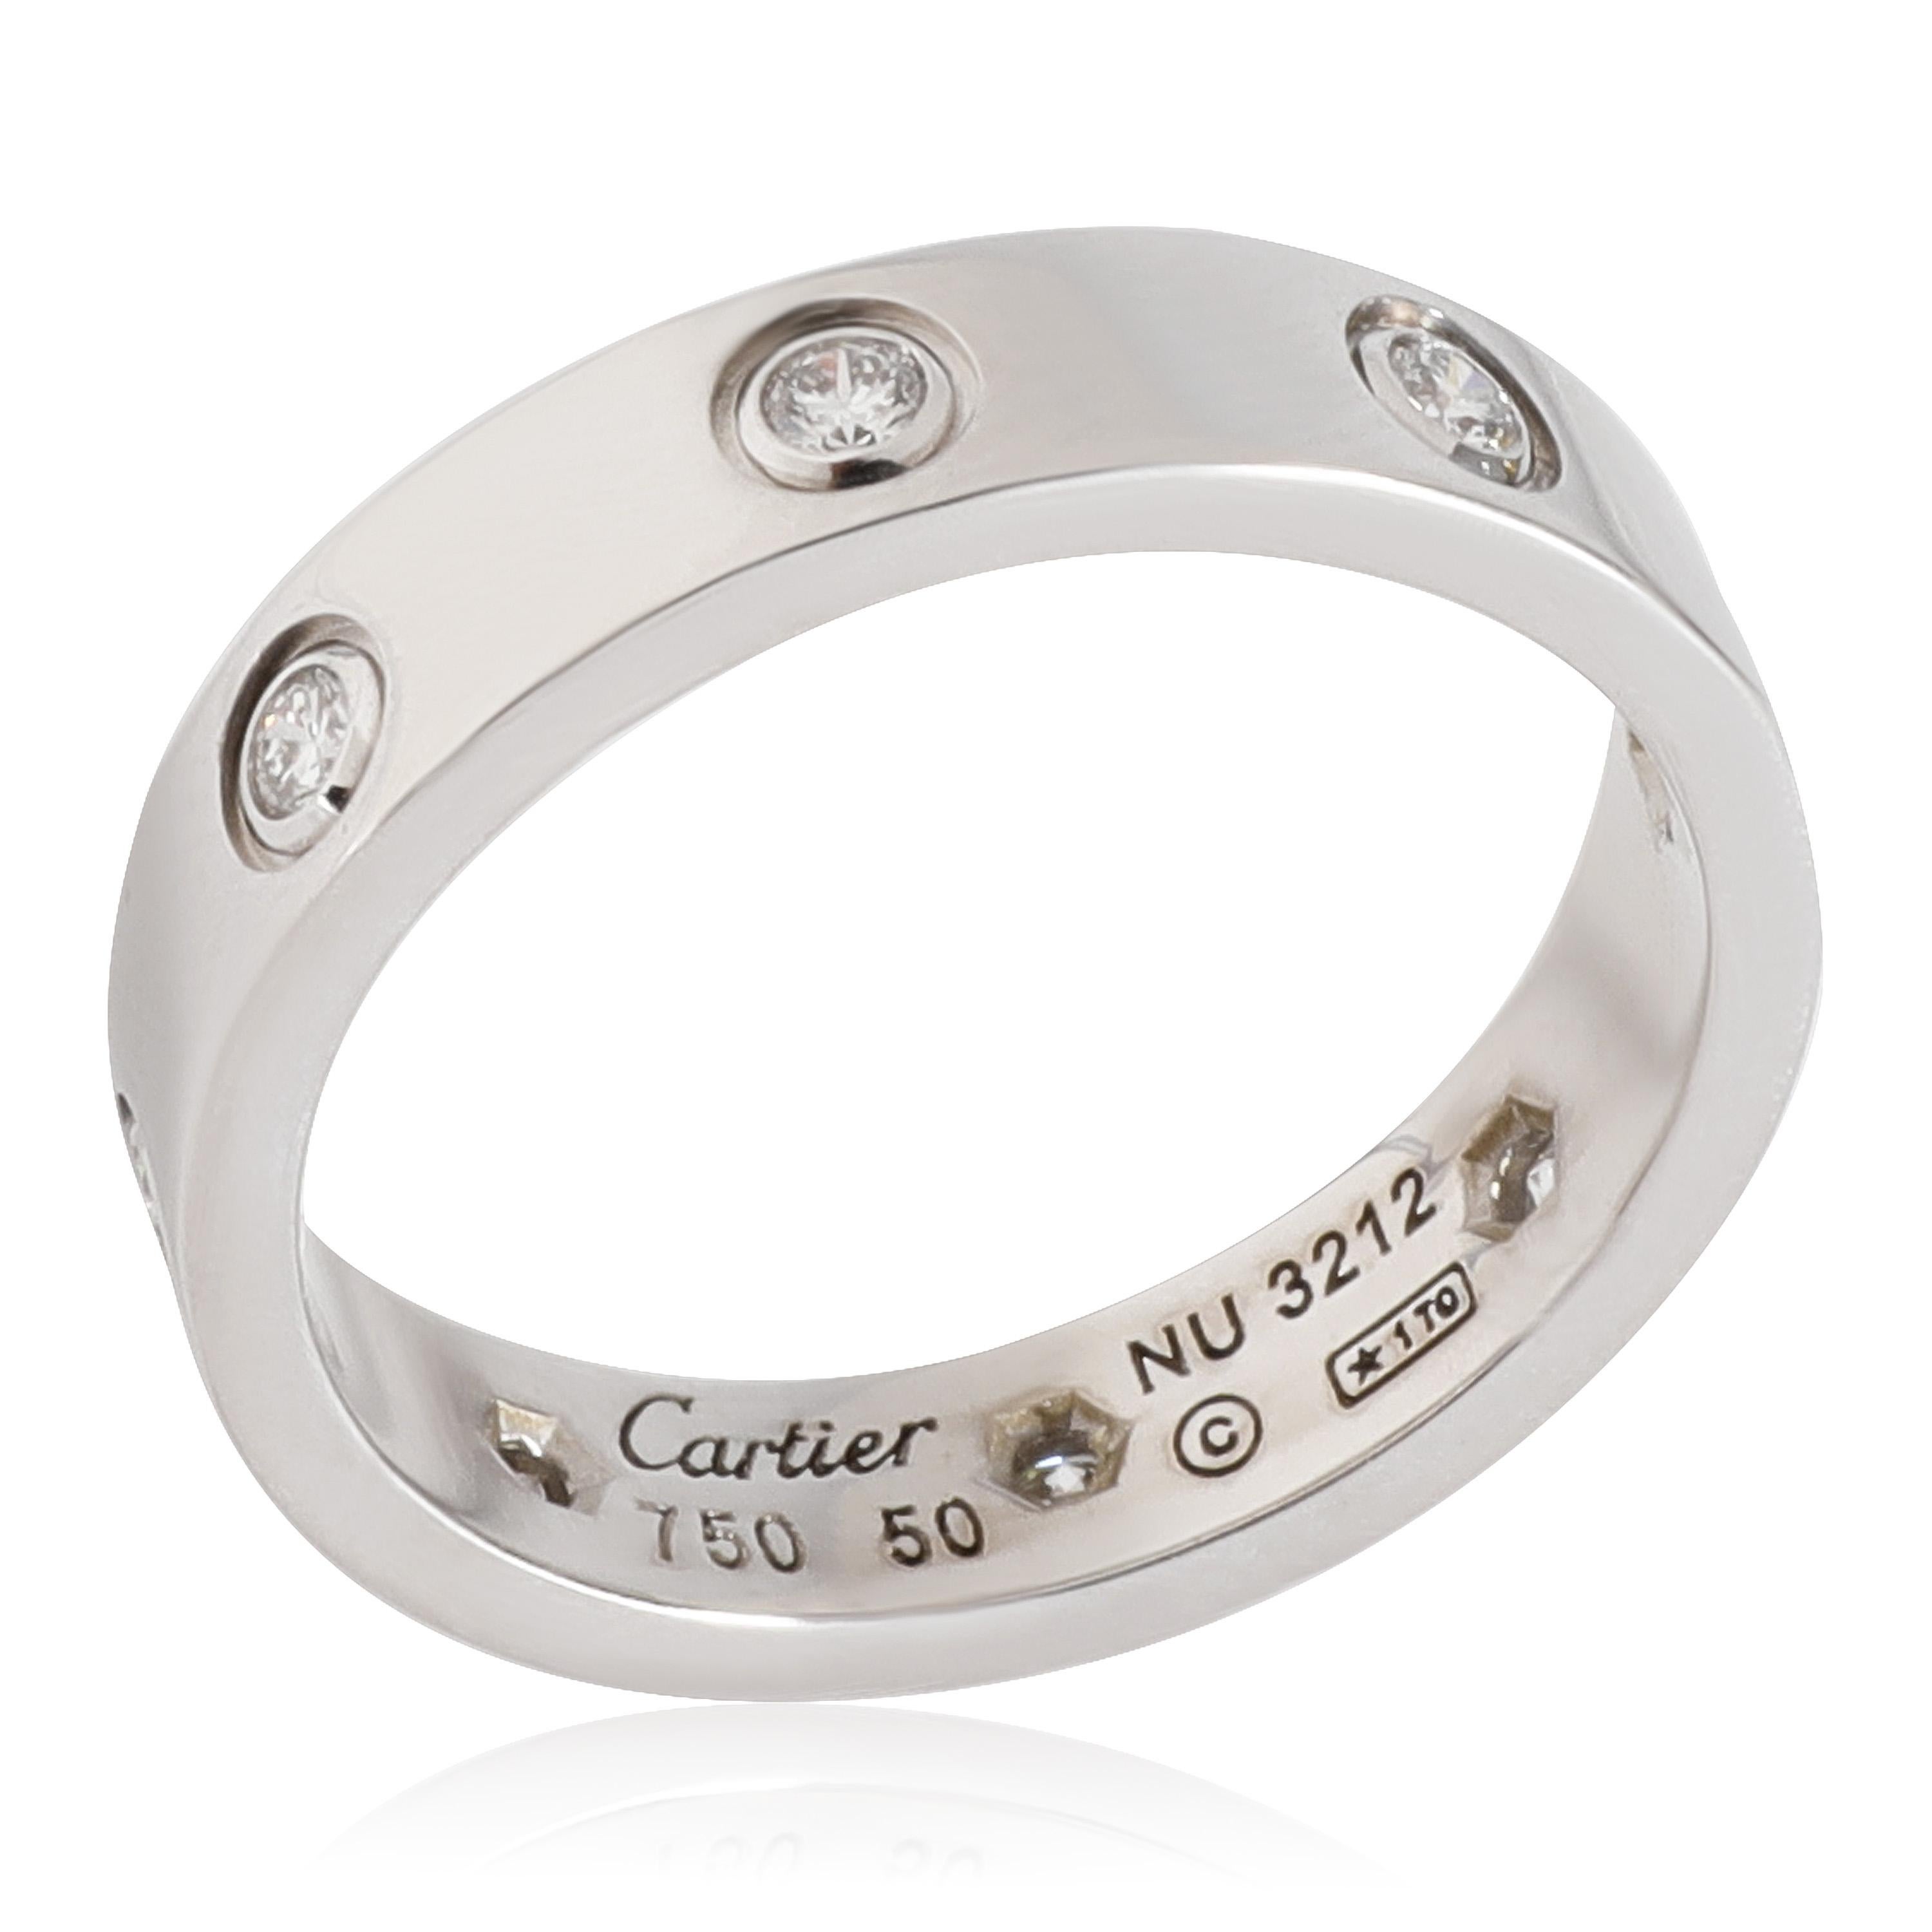 Cartier Love Diamond Wedding Band in 18k White Gold 0.19 CTW

PRIMARY DETAILS
SKU: 123192
Listing Title: Cartier Love Diamond Wedding Band in 18k White Gold 0.19 CTW
Condition Description: Retails for 4200 USD. In excellent condition. Ring size is